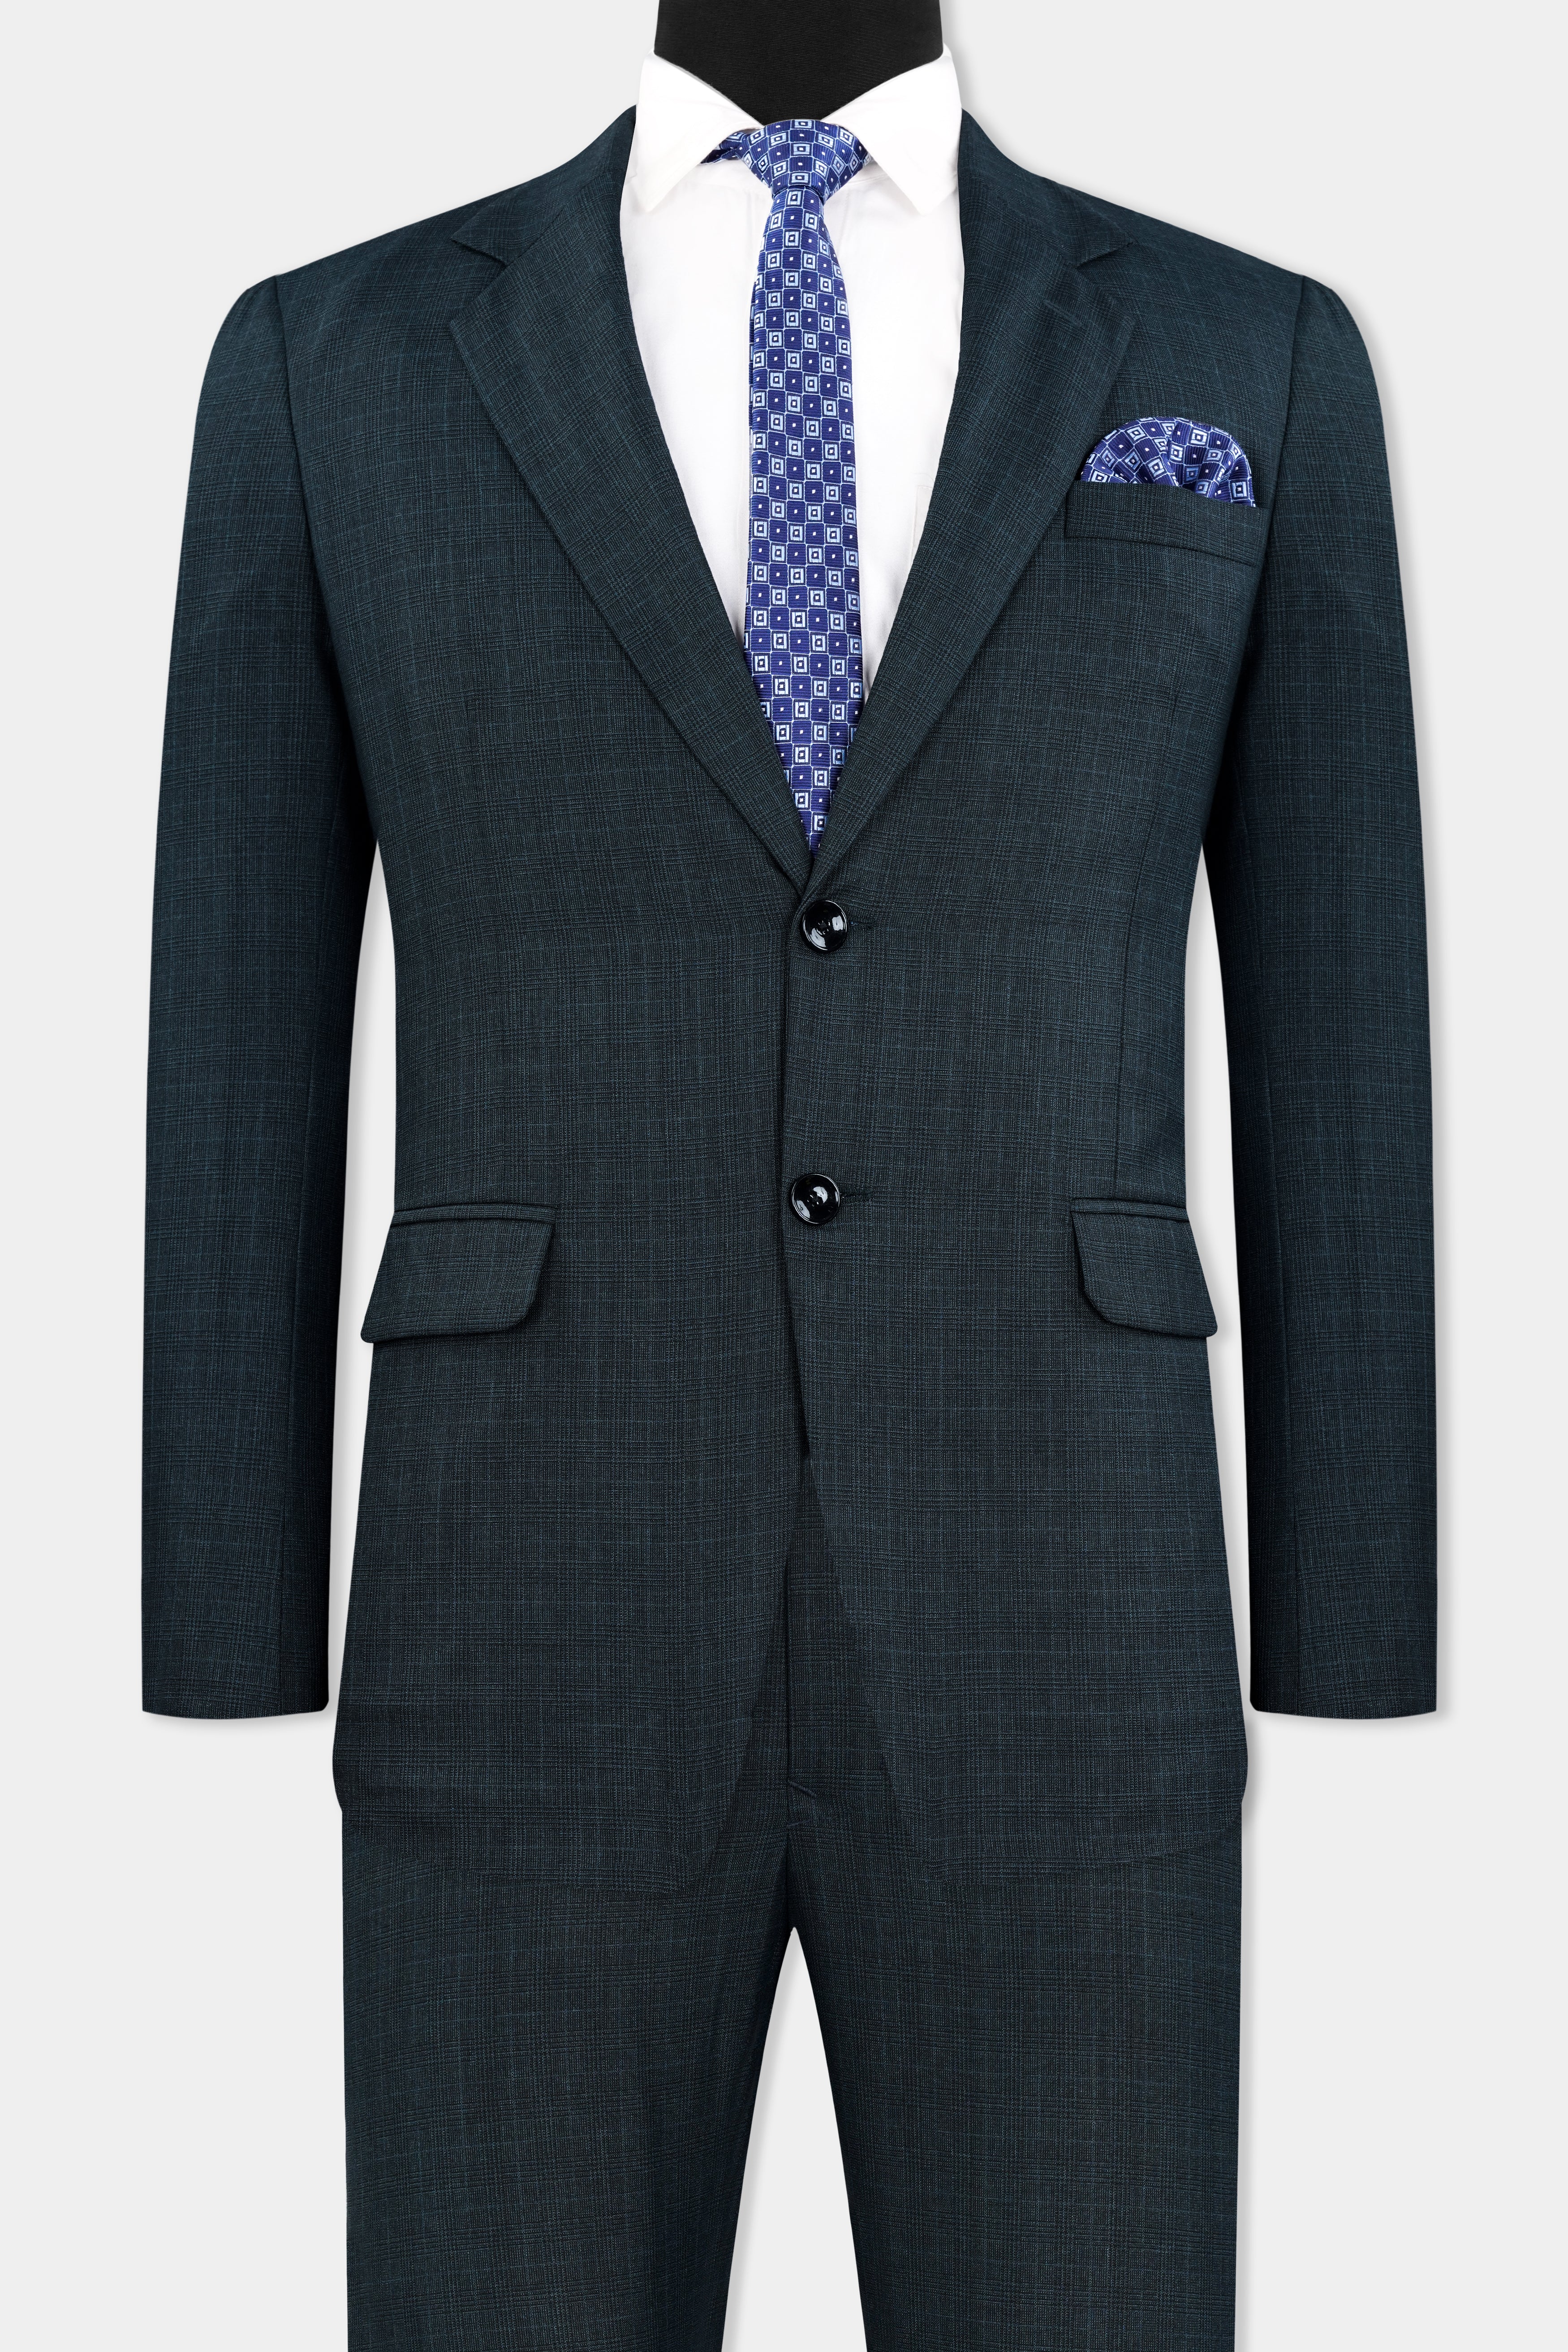 Charade Blue Wool Rich Single Breasted Suit ST2911-SB-36,ST2911-SB-38,ST2911-SB-40,ST2911-SB-42,ST2911-SB-44,ST2911-SB-46,ST2911-SB-48,ST2911-SB-50,ST2911-SB-52,ST2911-SB-54,ST2911-SB-56,ST2911-SB-58,ST2911-SB-60